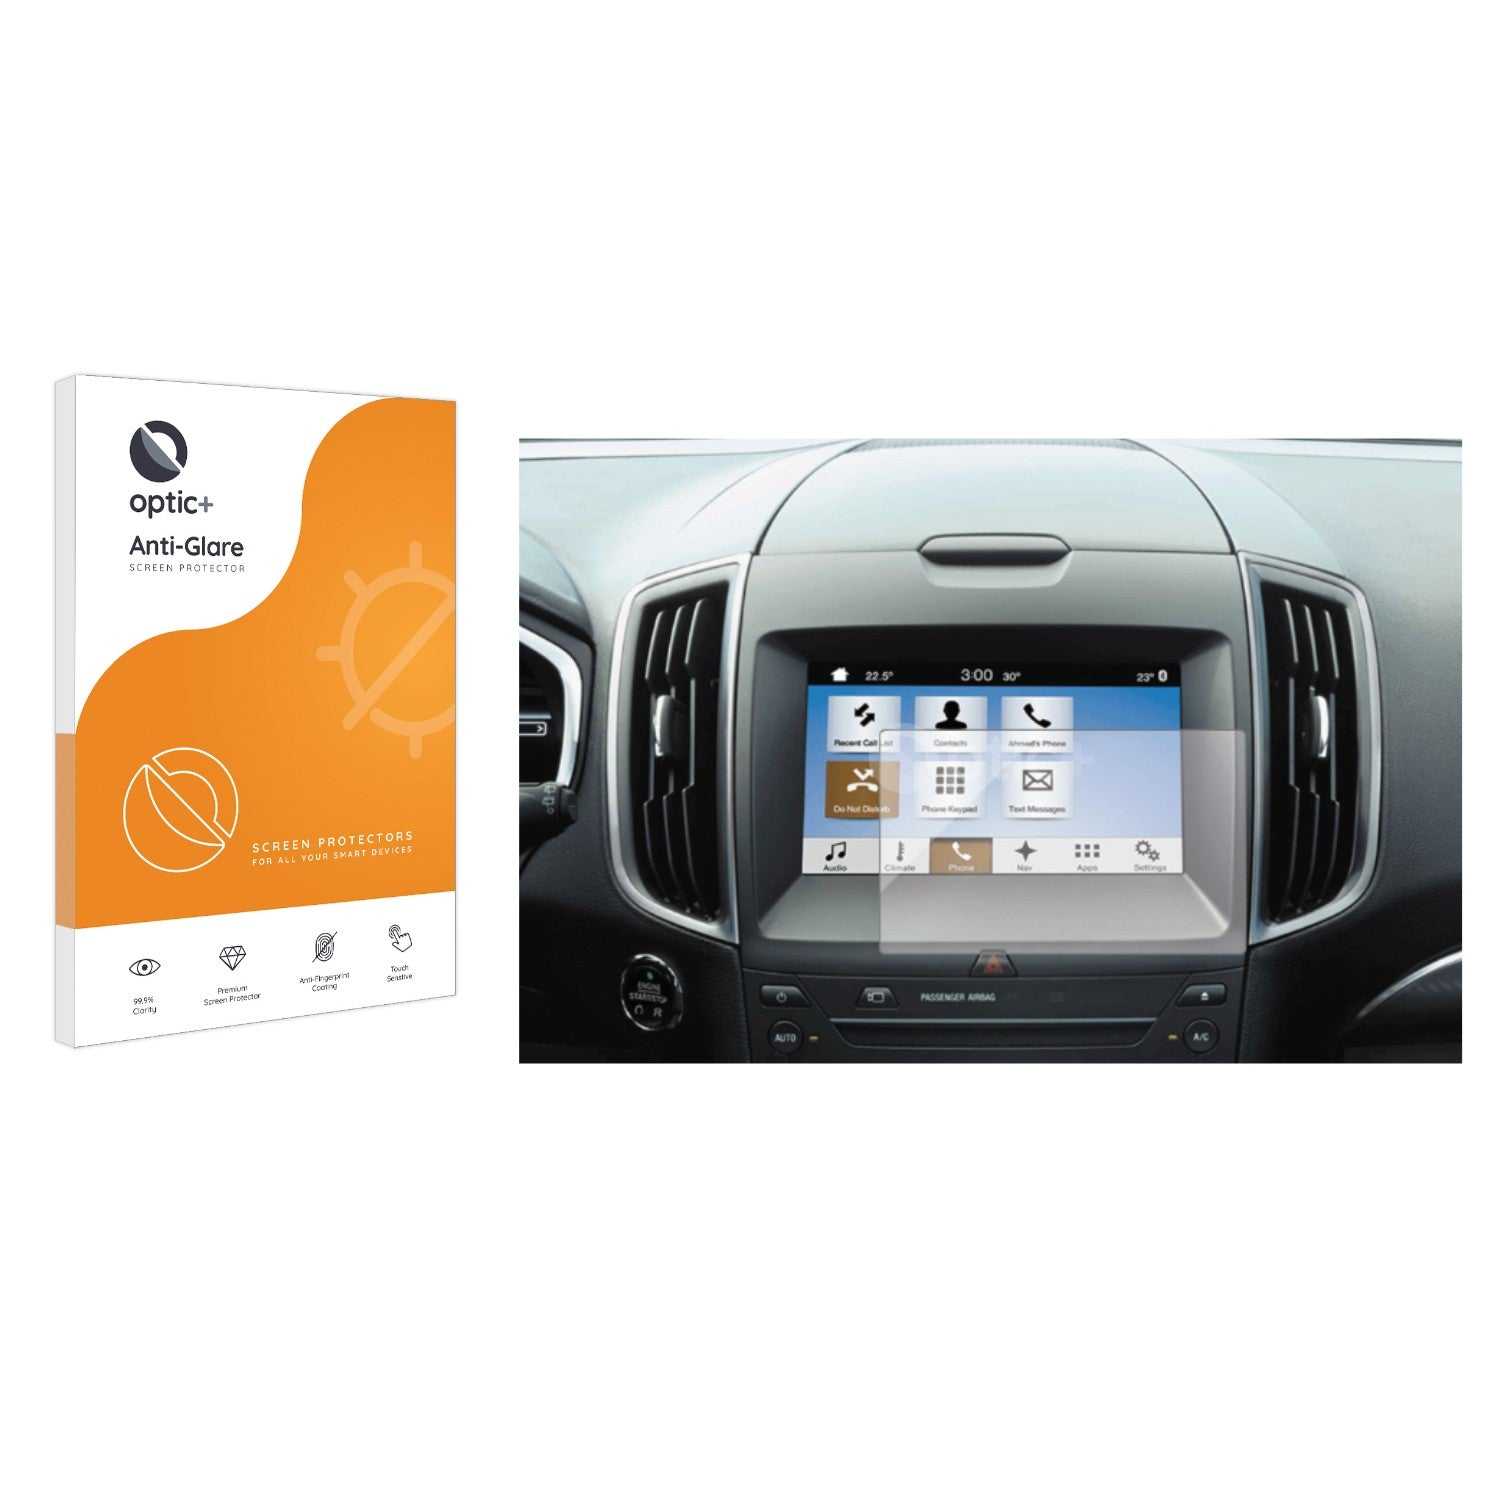 ScreenShield, Optic+ Anti-Glare Screen Protector for Ford Everest 2016 SYNC2 8"